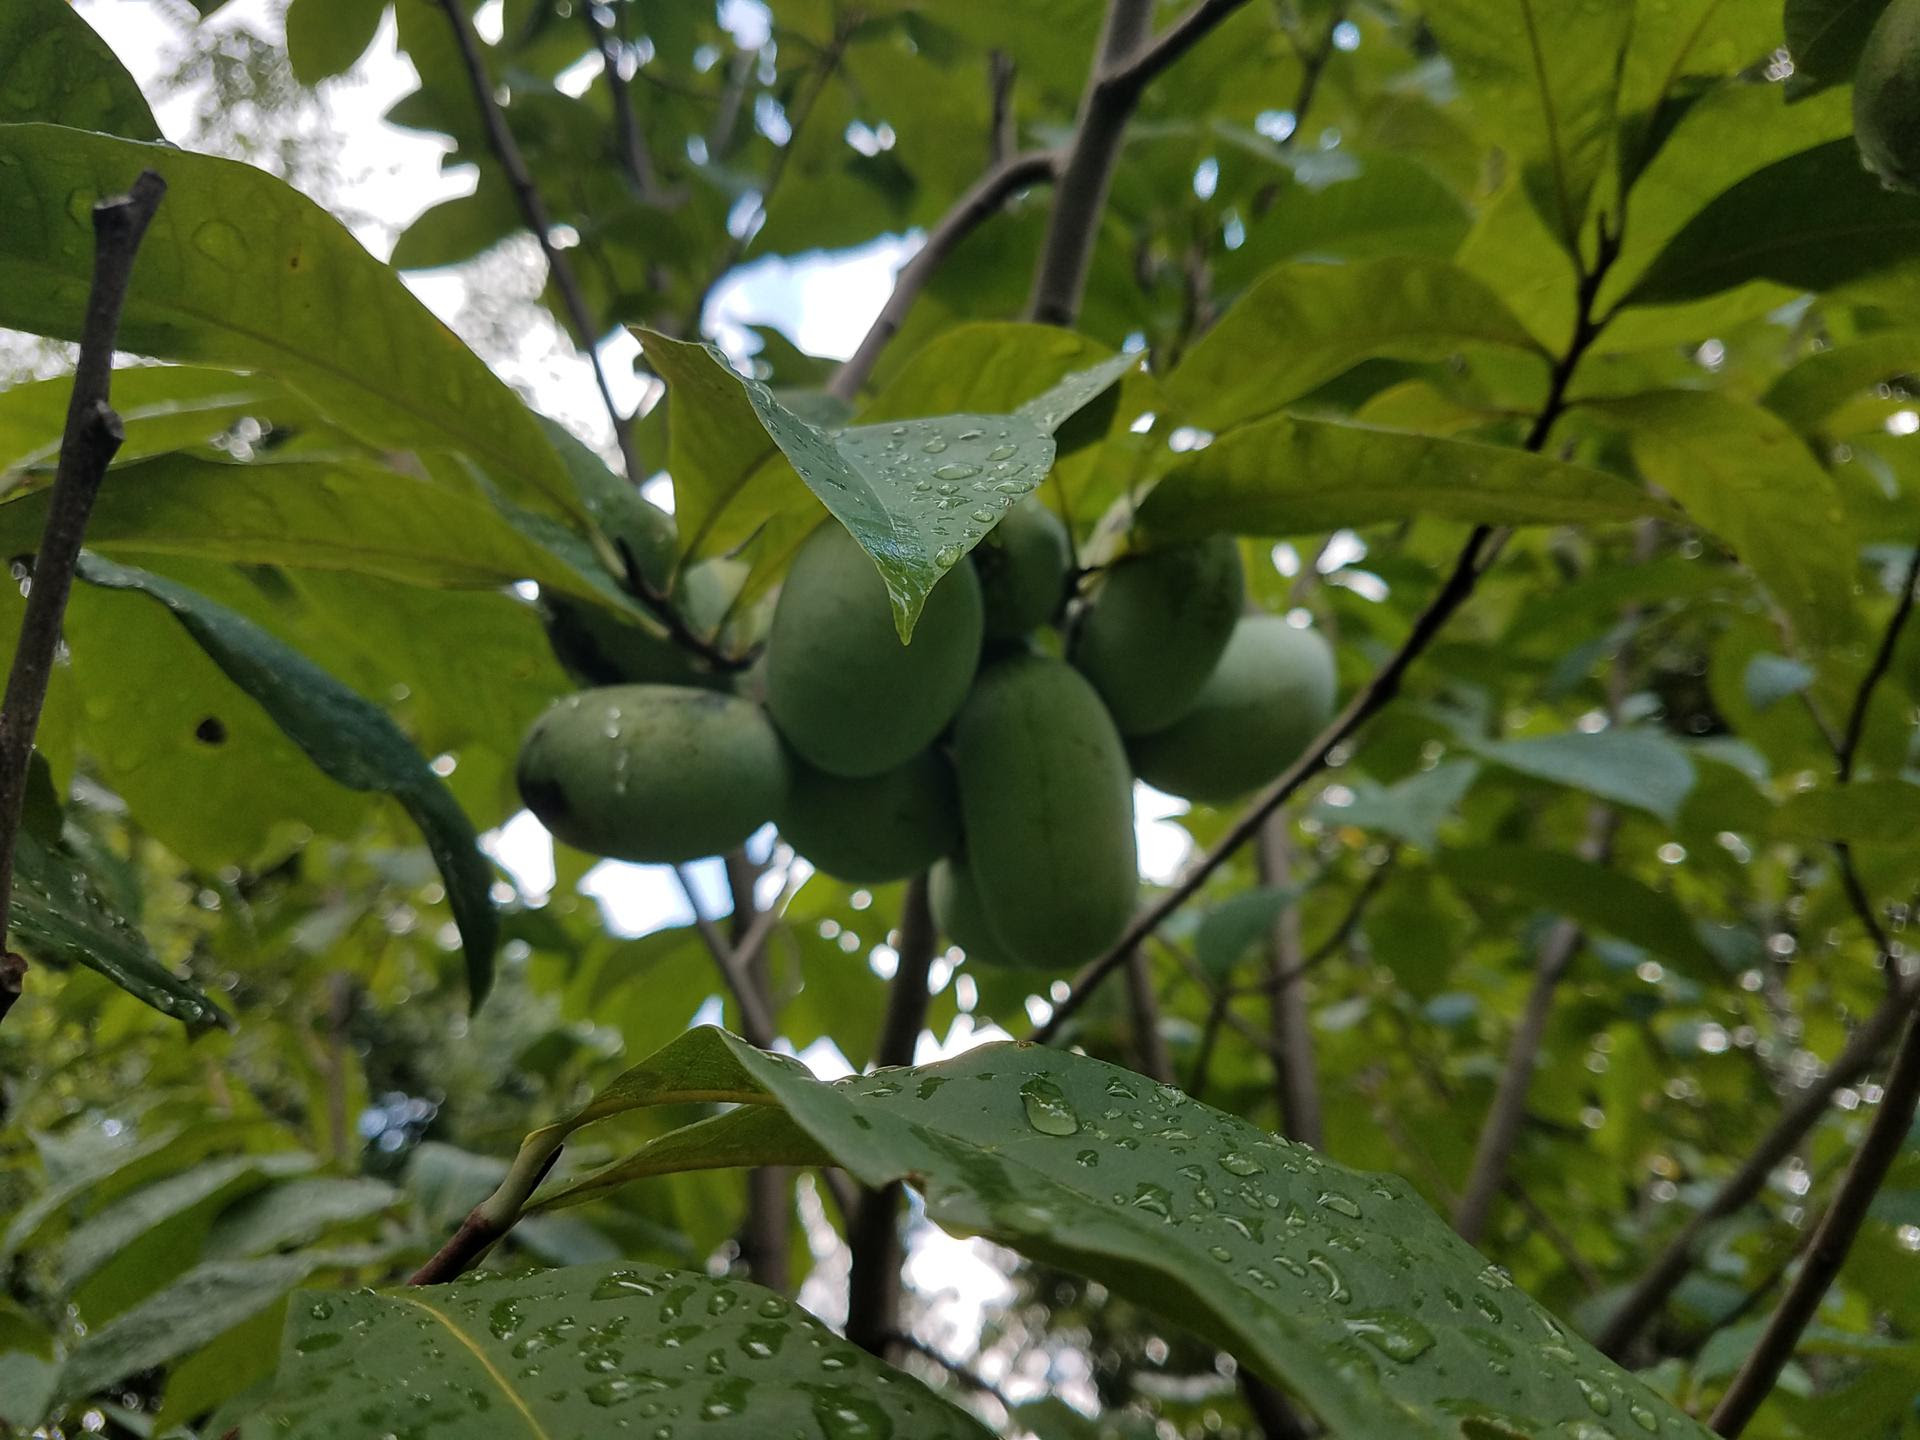 A cluster of pawpaws on a tree whose leaves are glistening with raindrops